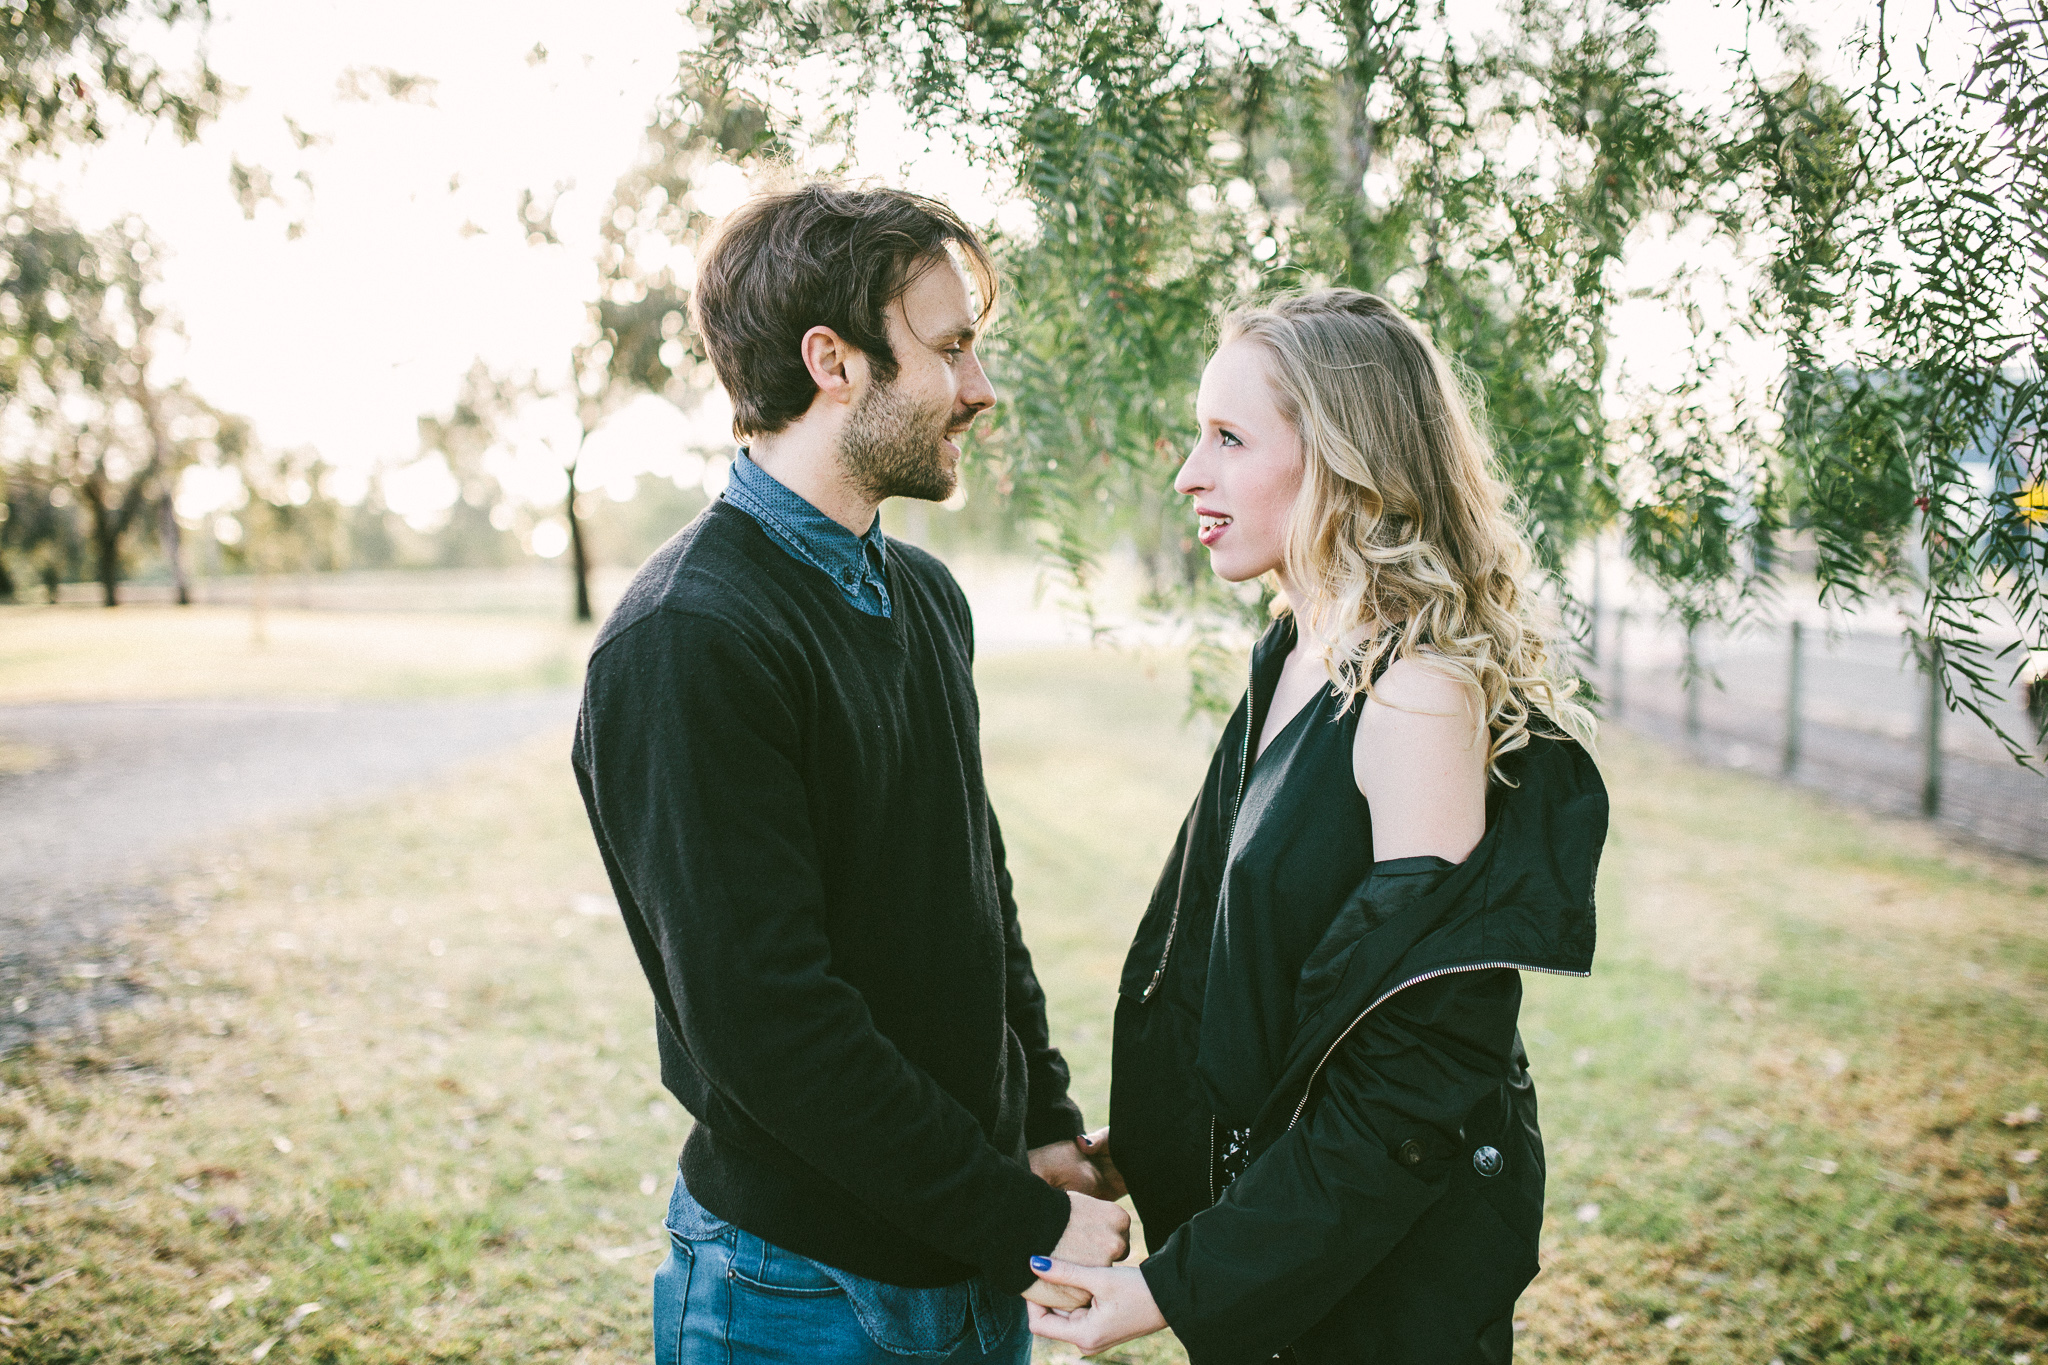 Melbourne-Fun-Quirky-Relaxed-Couples-Session-Portrait-Photographer_02